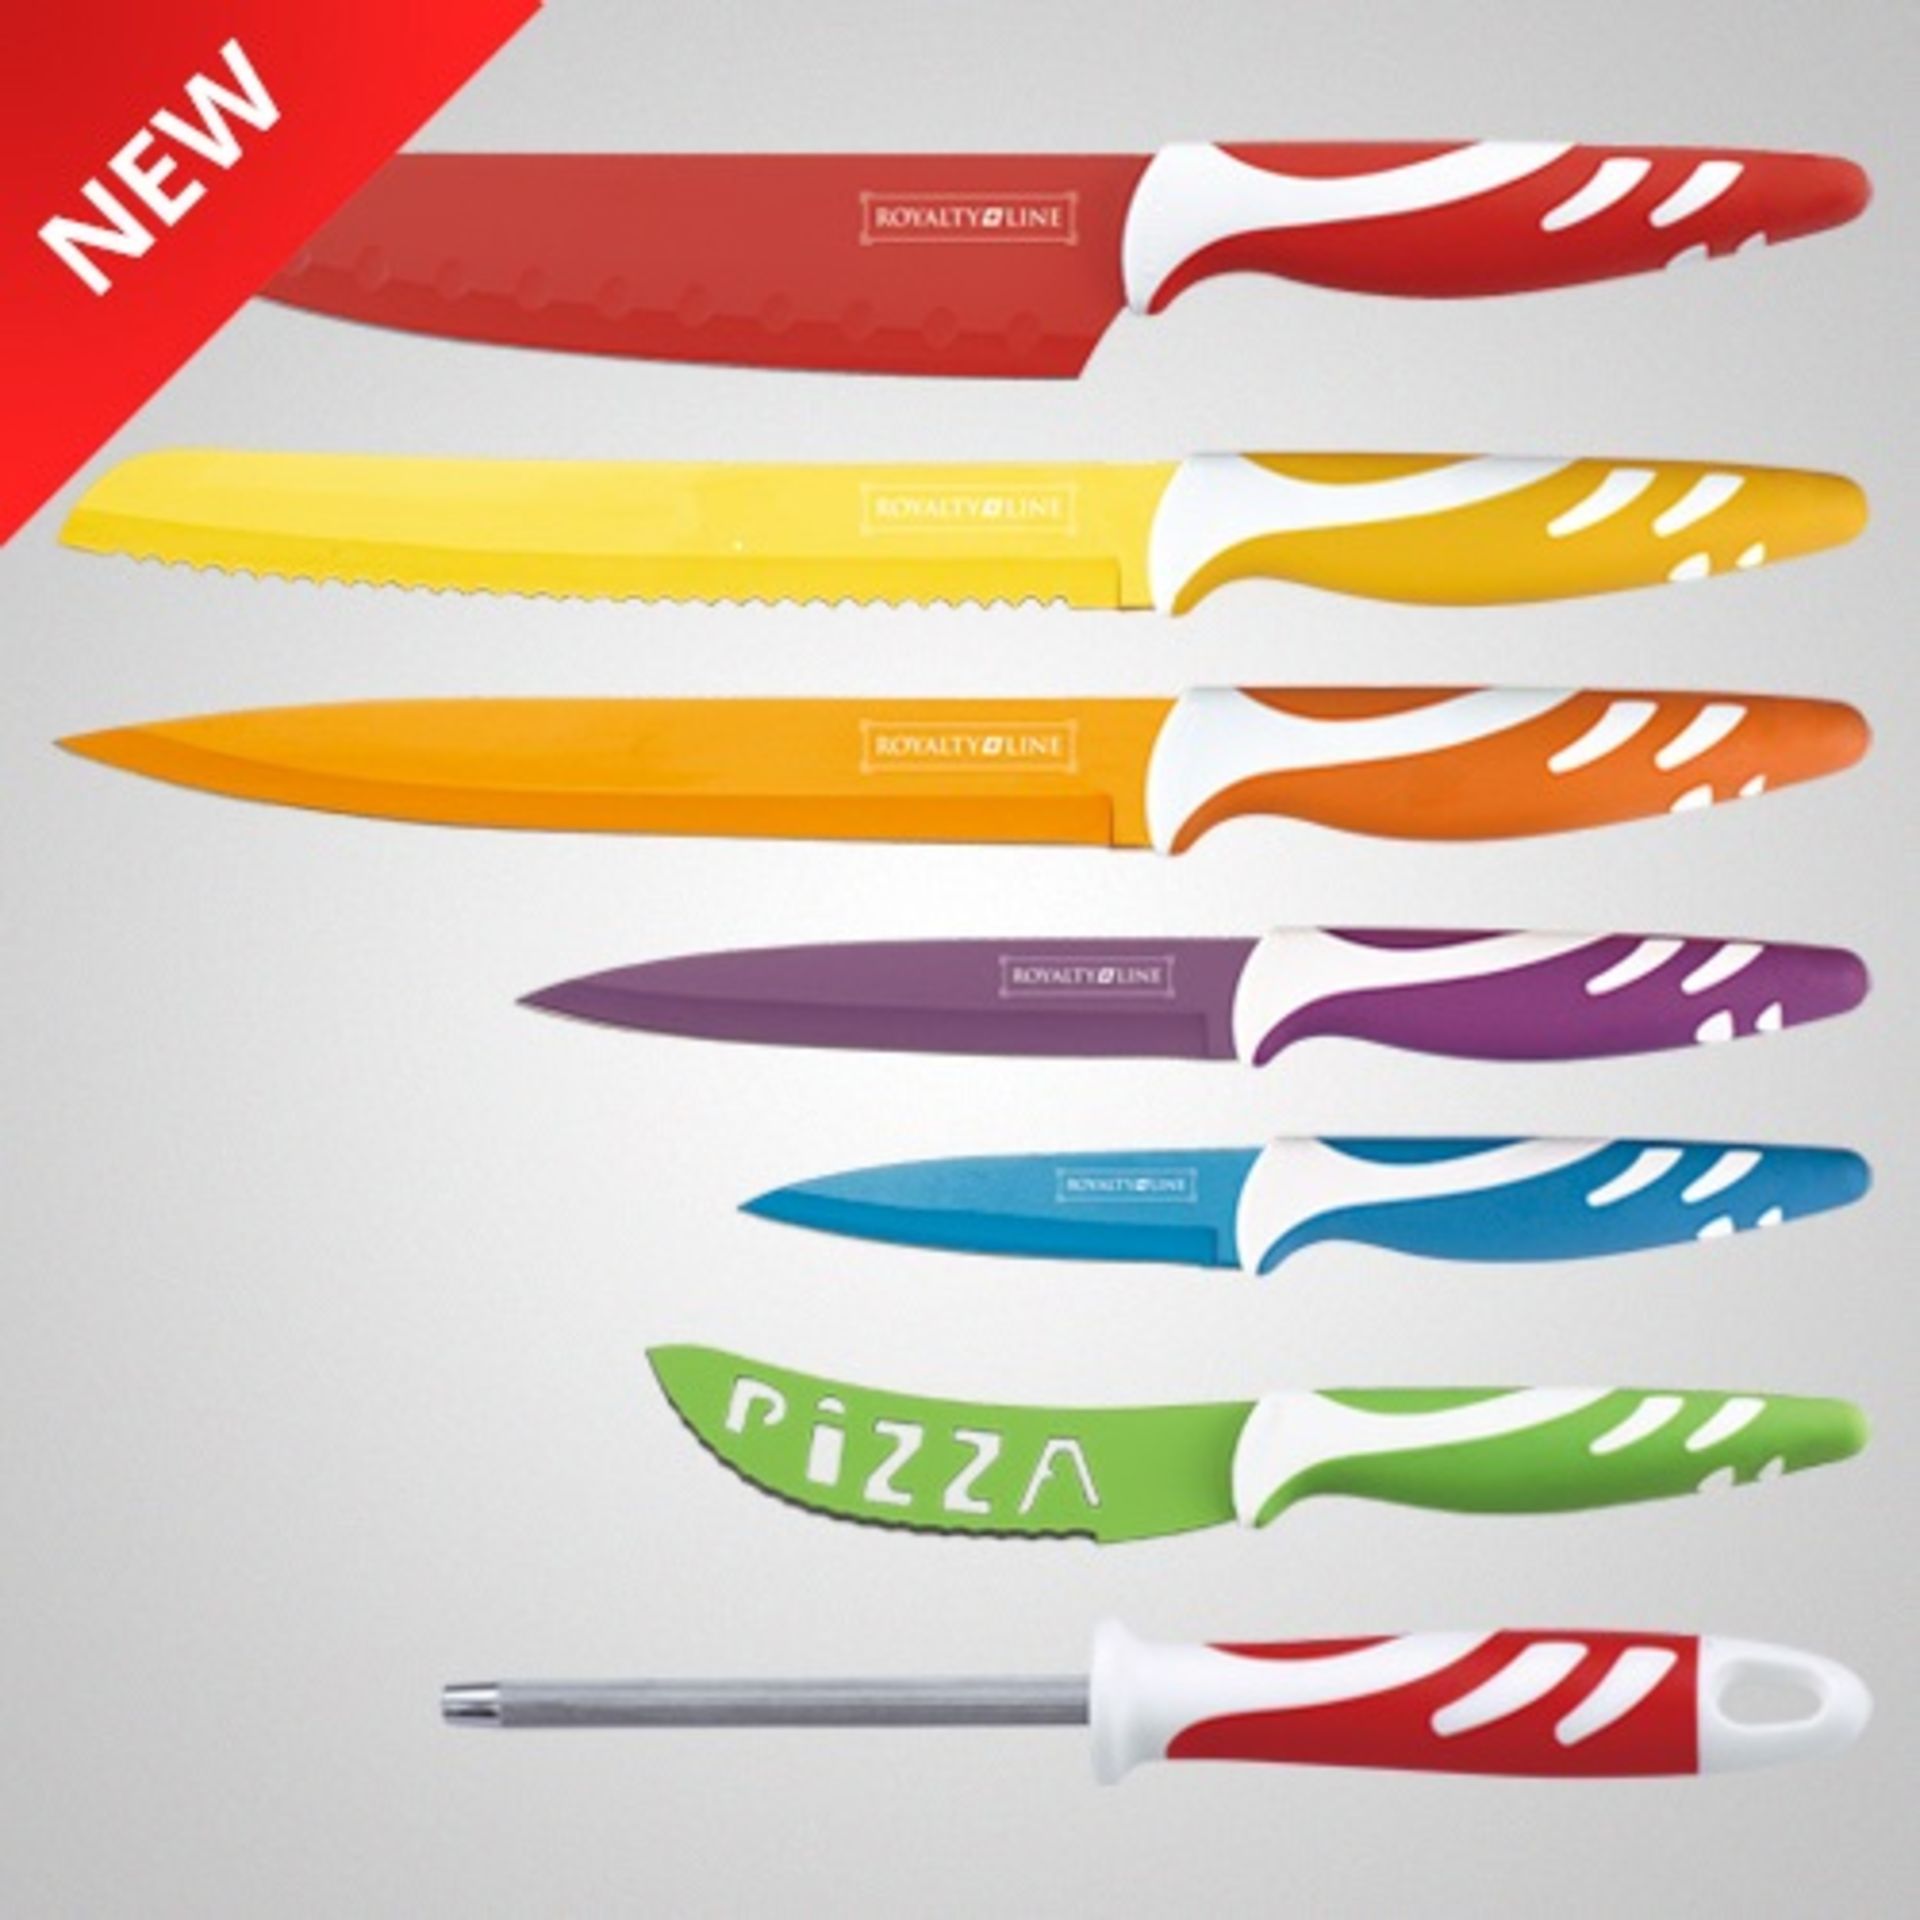 V *TRADE QTY* Brand New 7 Piece Non-Stick Multi Coloured Knife Set RRP99.00 Euros (Handle pattern - Image 2 of 2